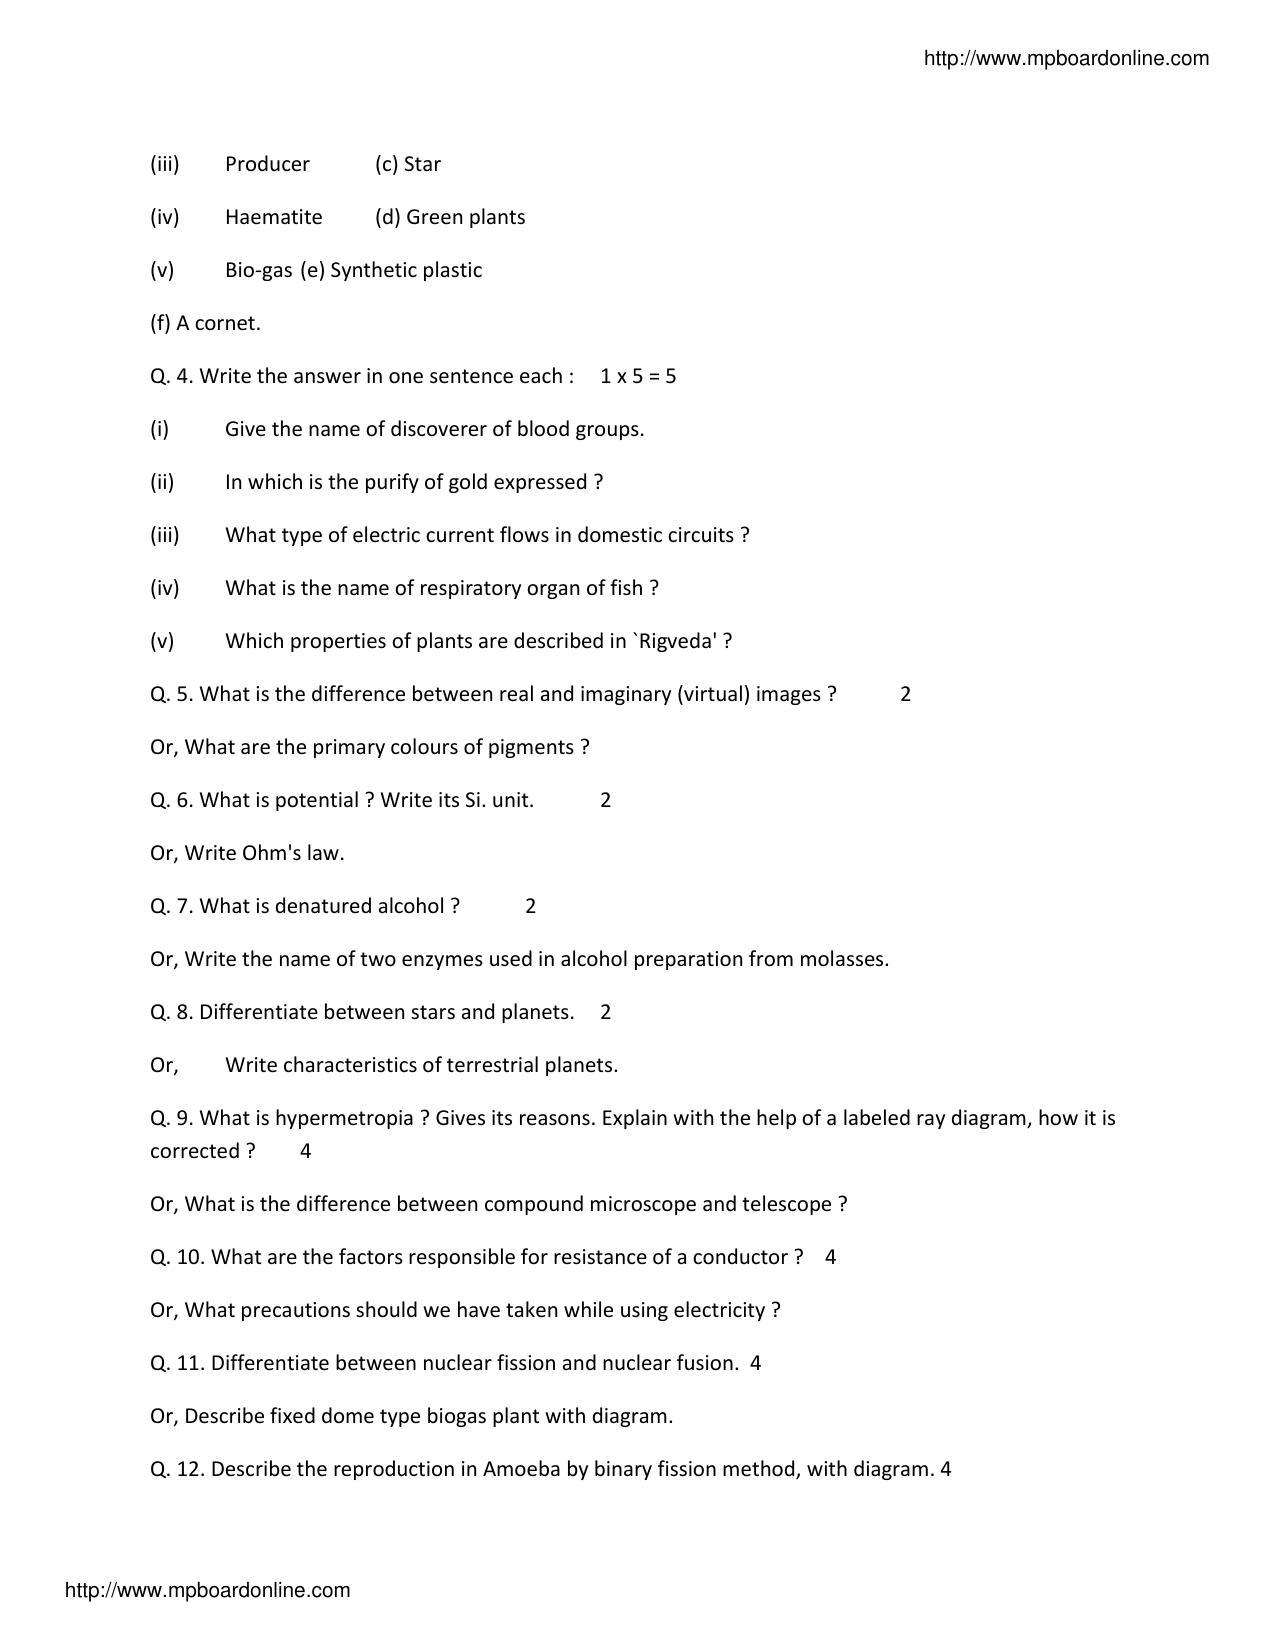 MP Board Class 10 Science 2016 Question Paper - Page 2